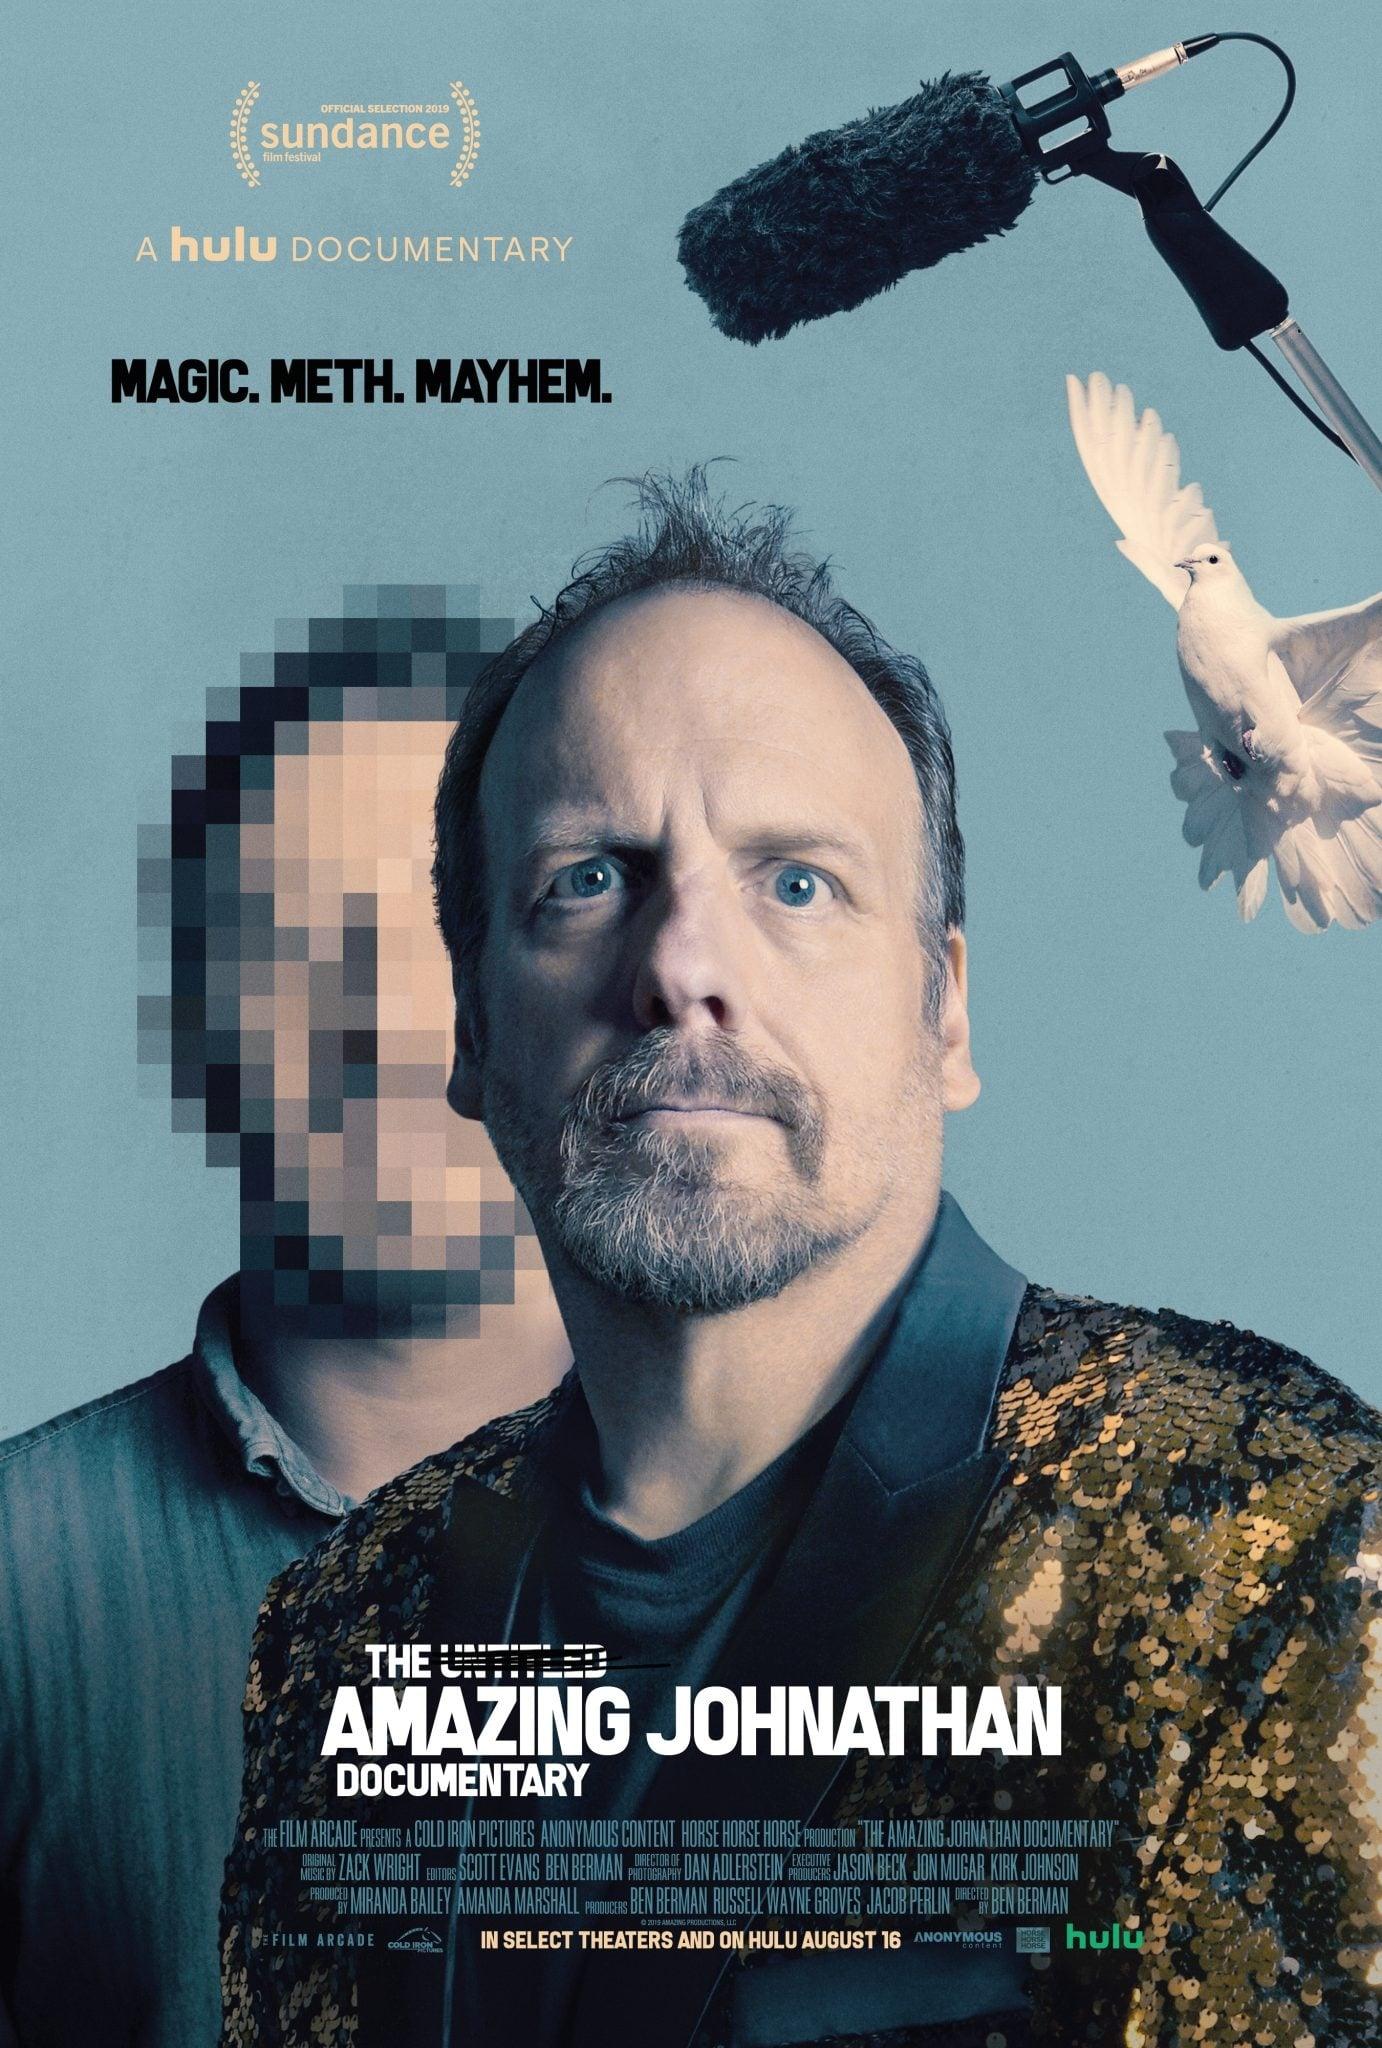 The Amazing Johnathan Documentary poster